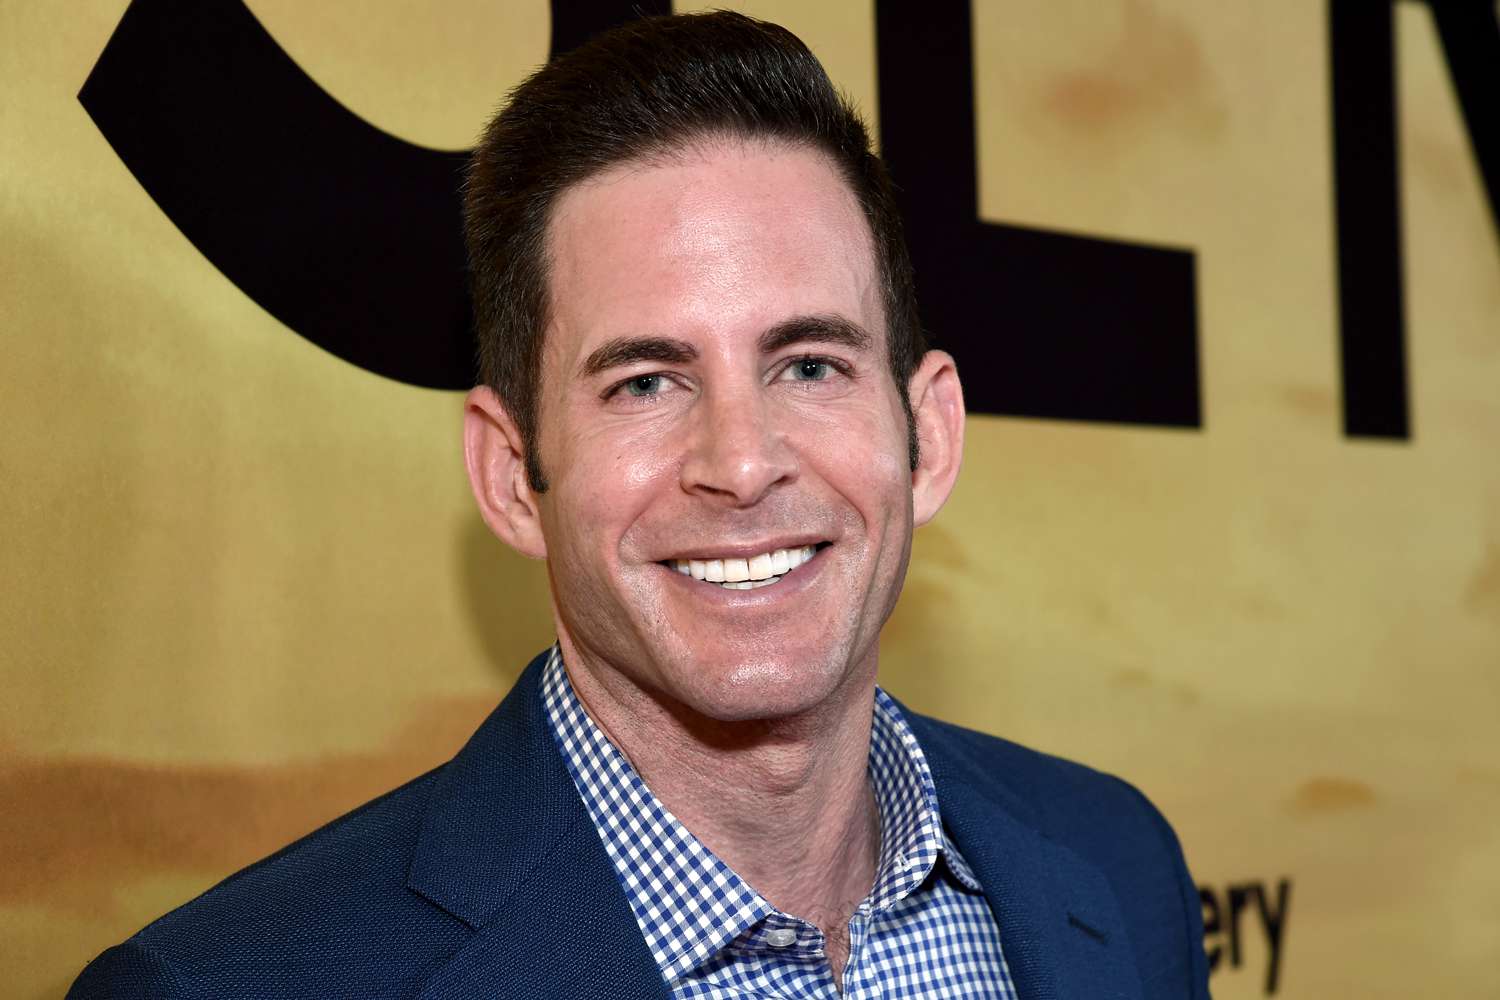 Tarek El Moussa Plastic Surgery: Before and After His Botox